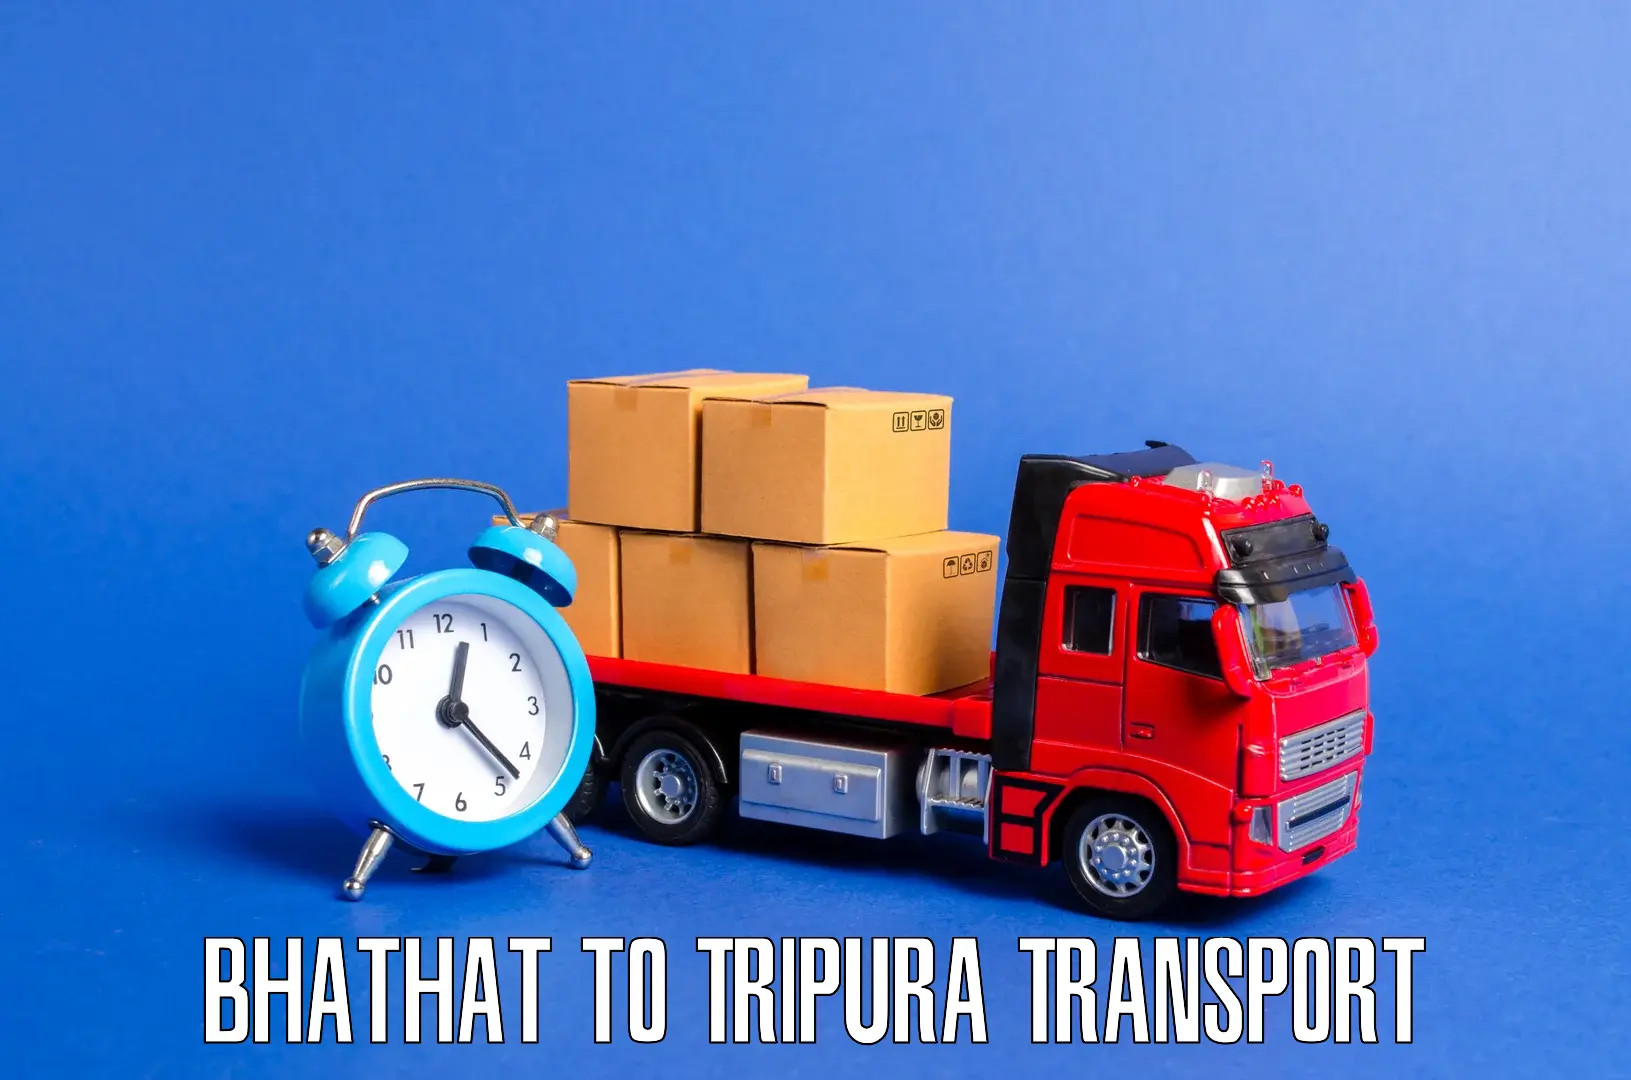 Daily parcel service transport Bhathat to Tripura